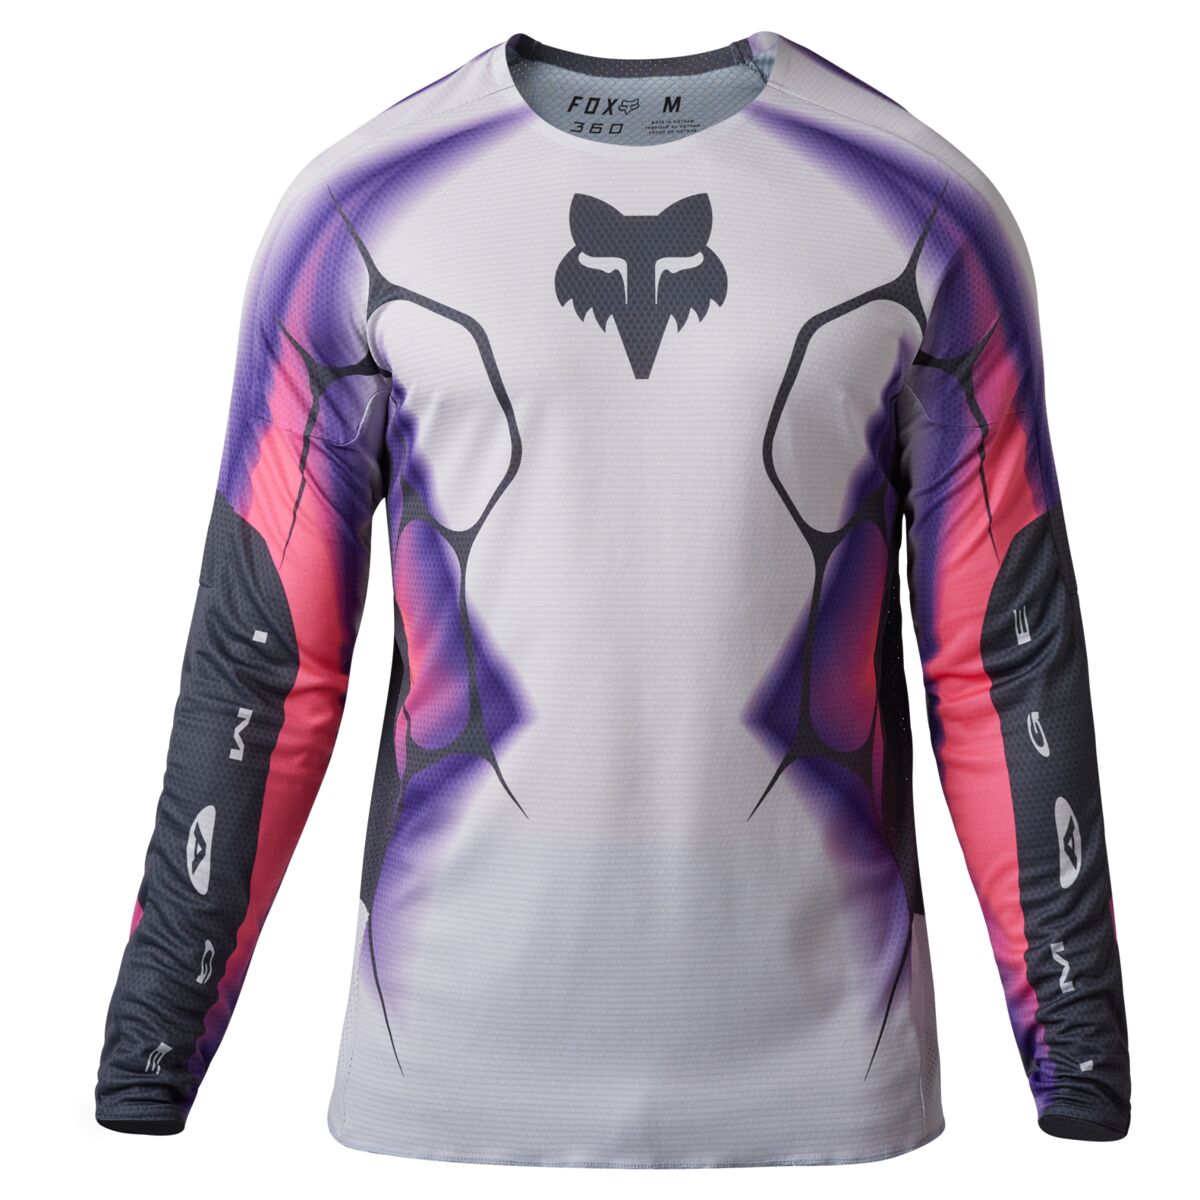 360 SYZ JERSEY